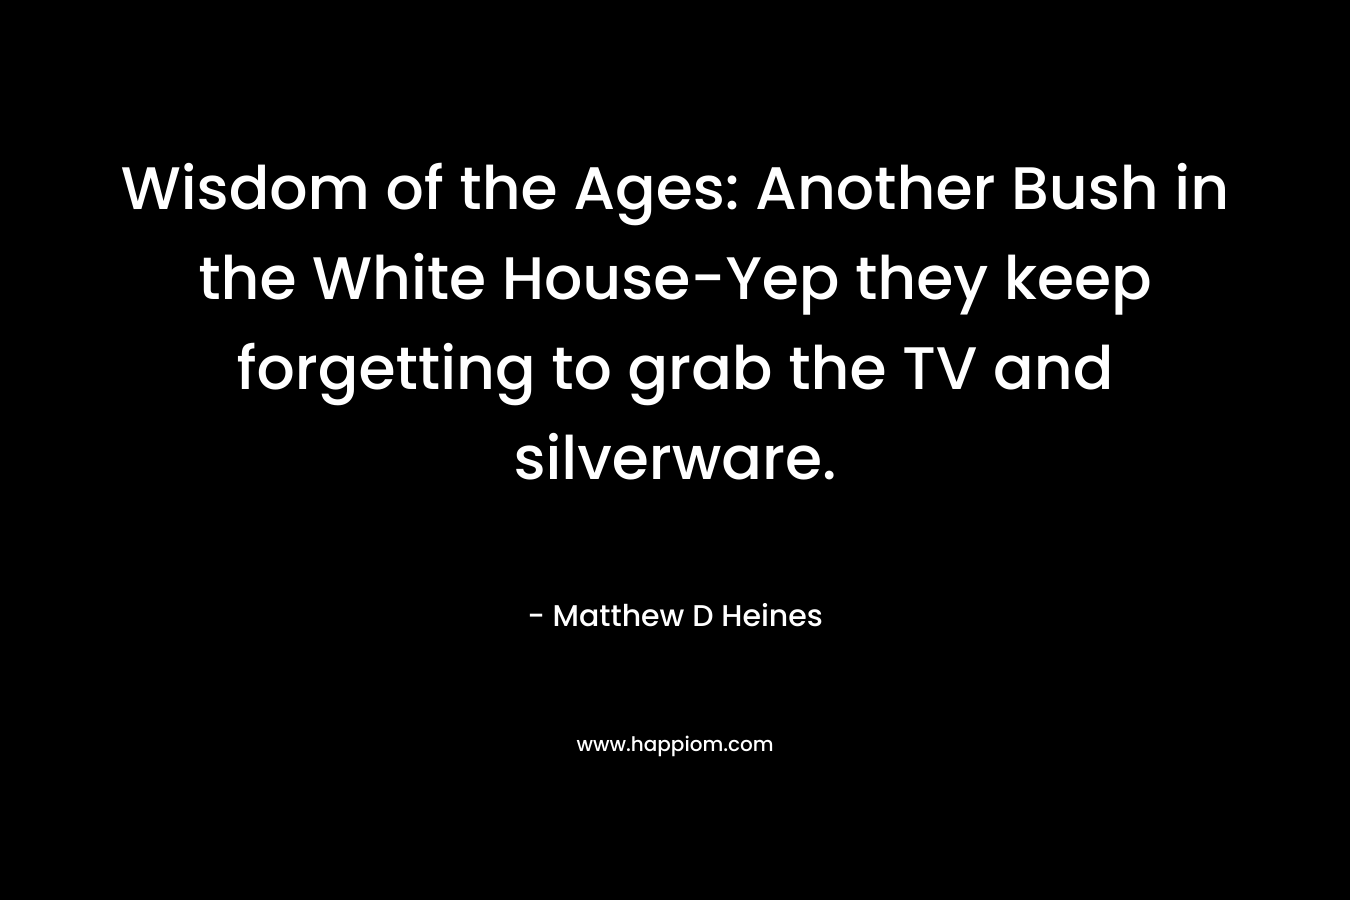 Wisdom of the Ages: Another Bush in the White House-Yep they keep forgetting to grab the TV and silverware. – Matthew D Heines